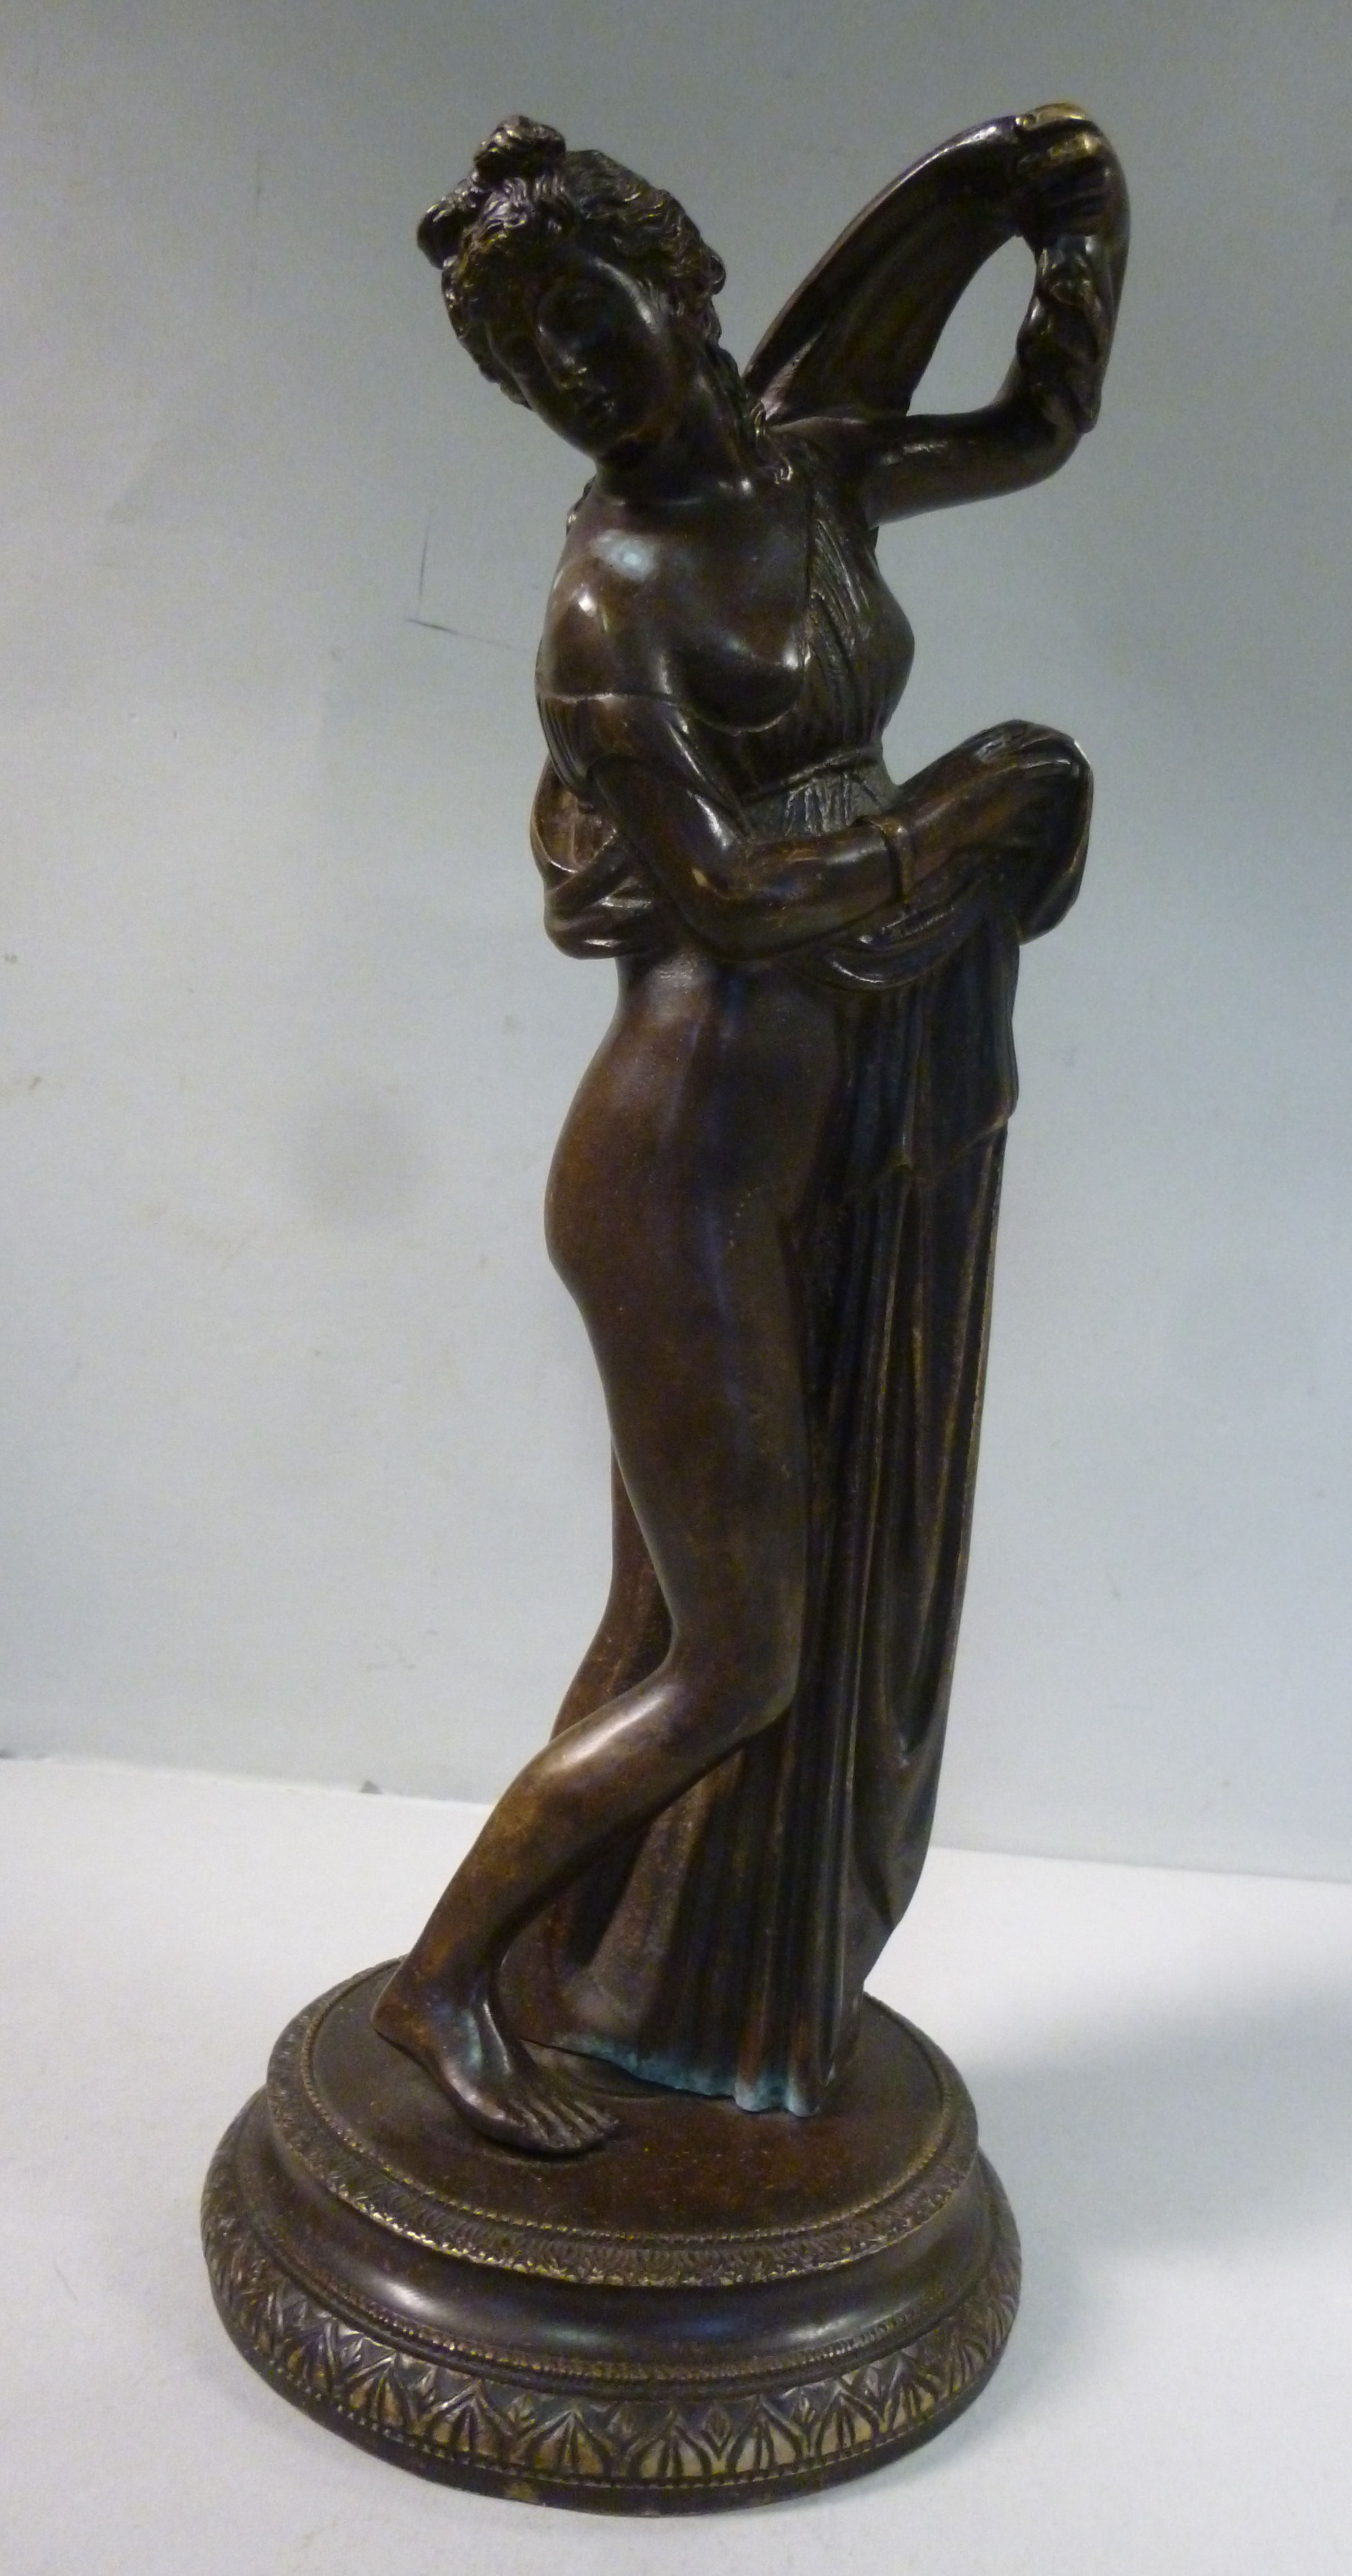 An early 20thC cast and patinated bronze figure, a partially robed, standing classical maiden, - Image 2 of 8